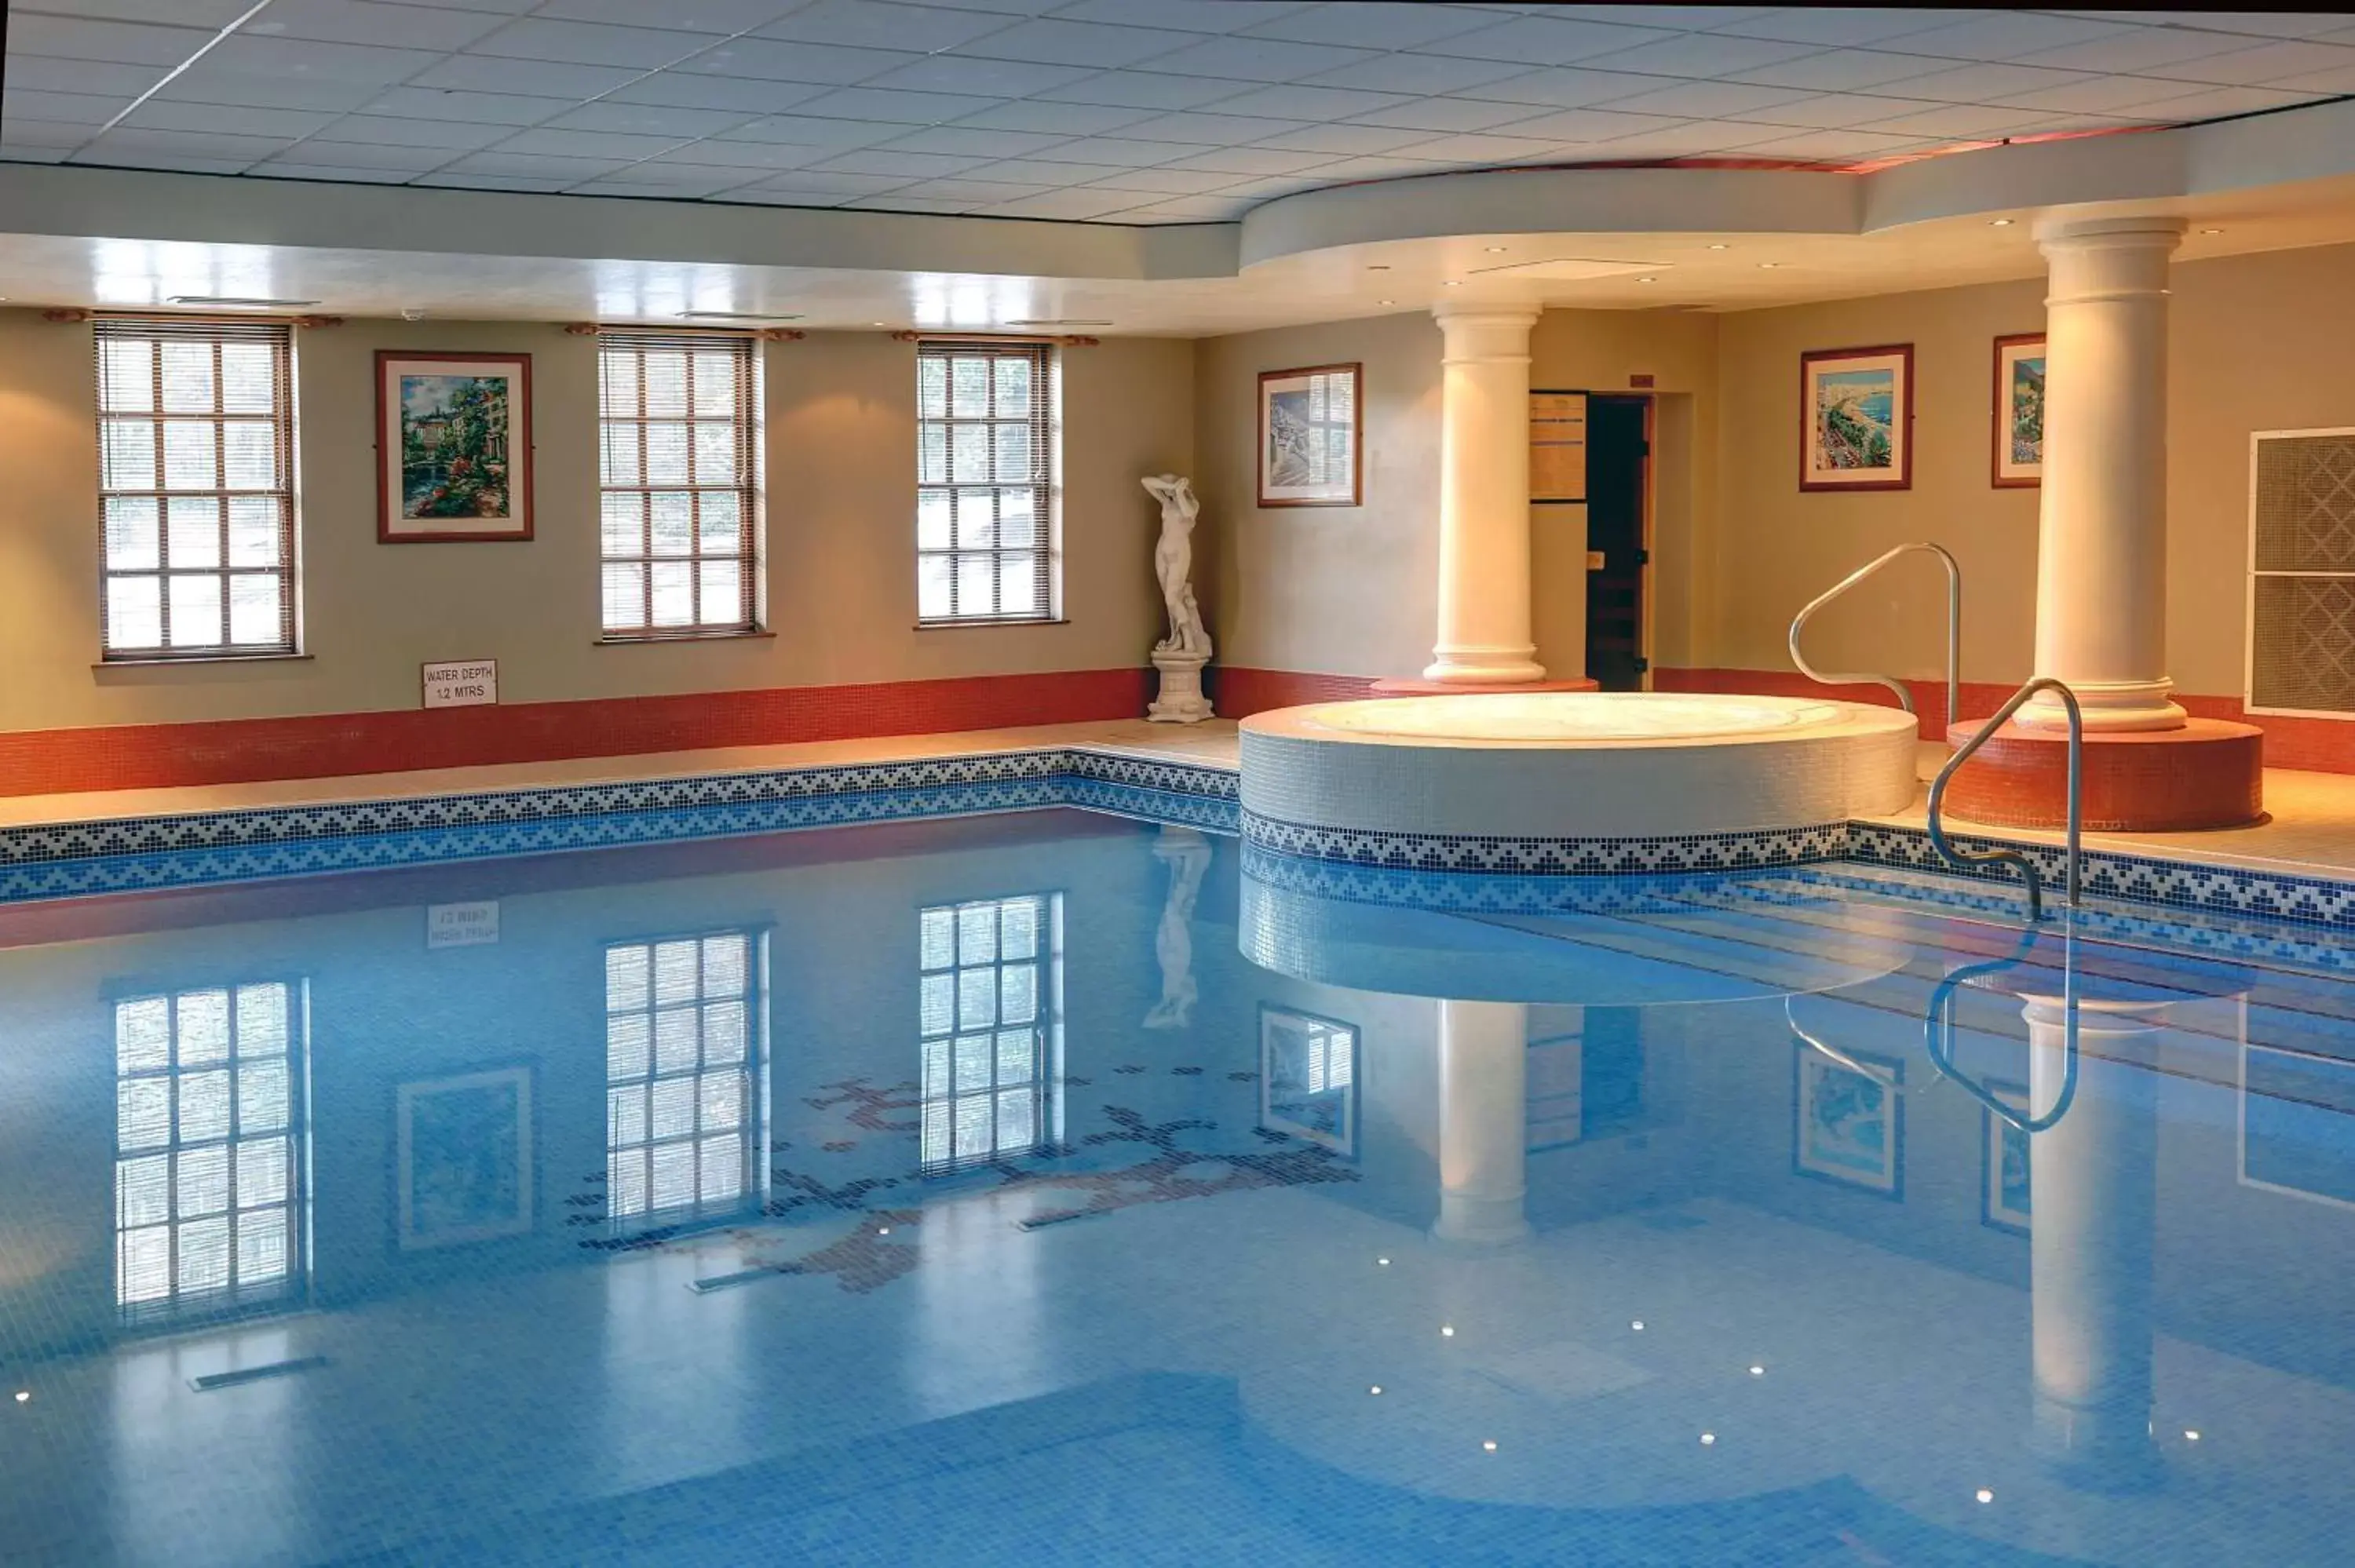 On site, Swimming Pool in The Crown Hotel, Boroughbridge, North Yorkshire